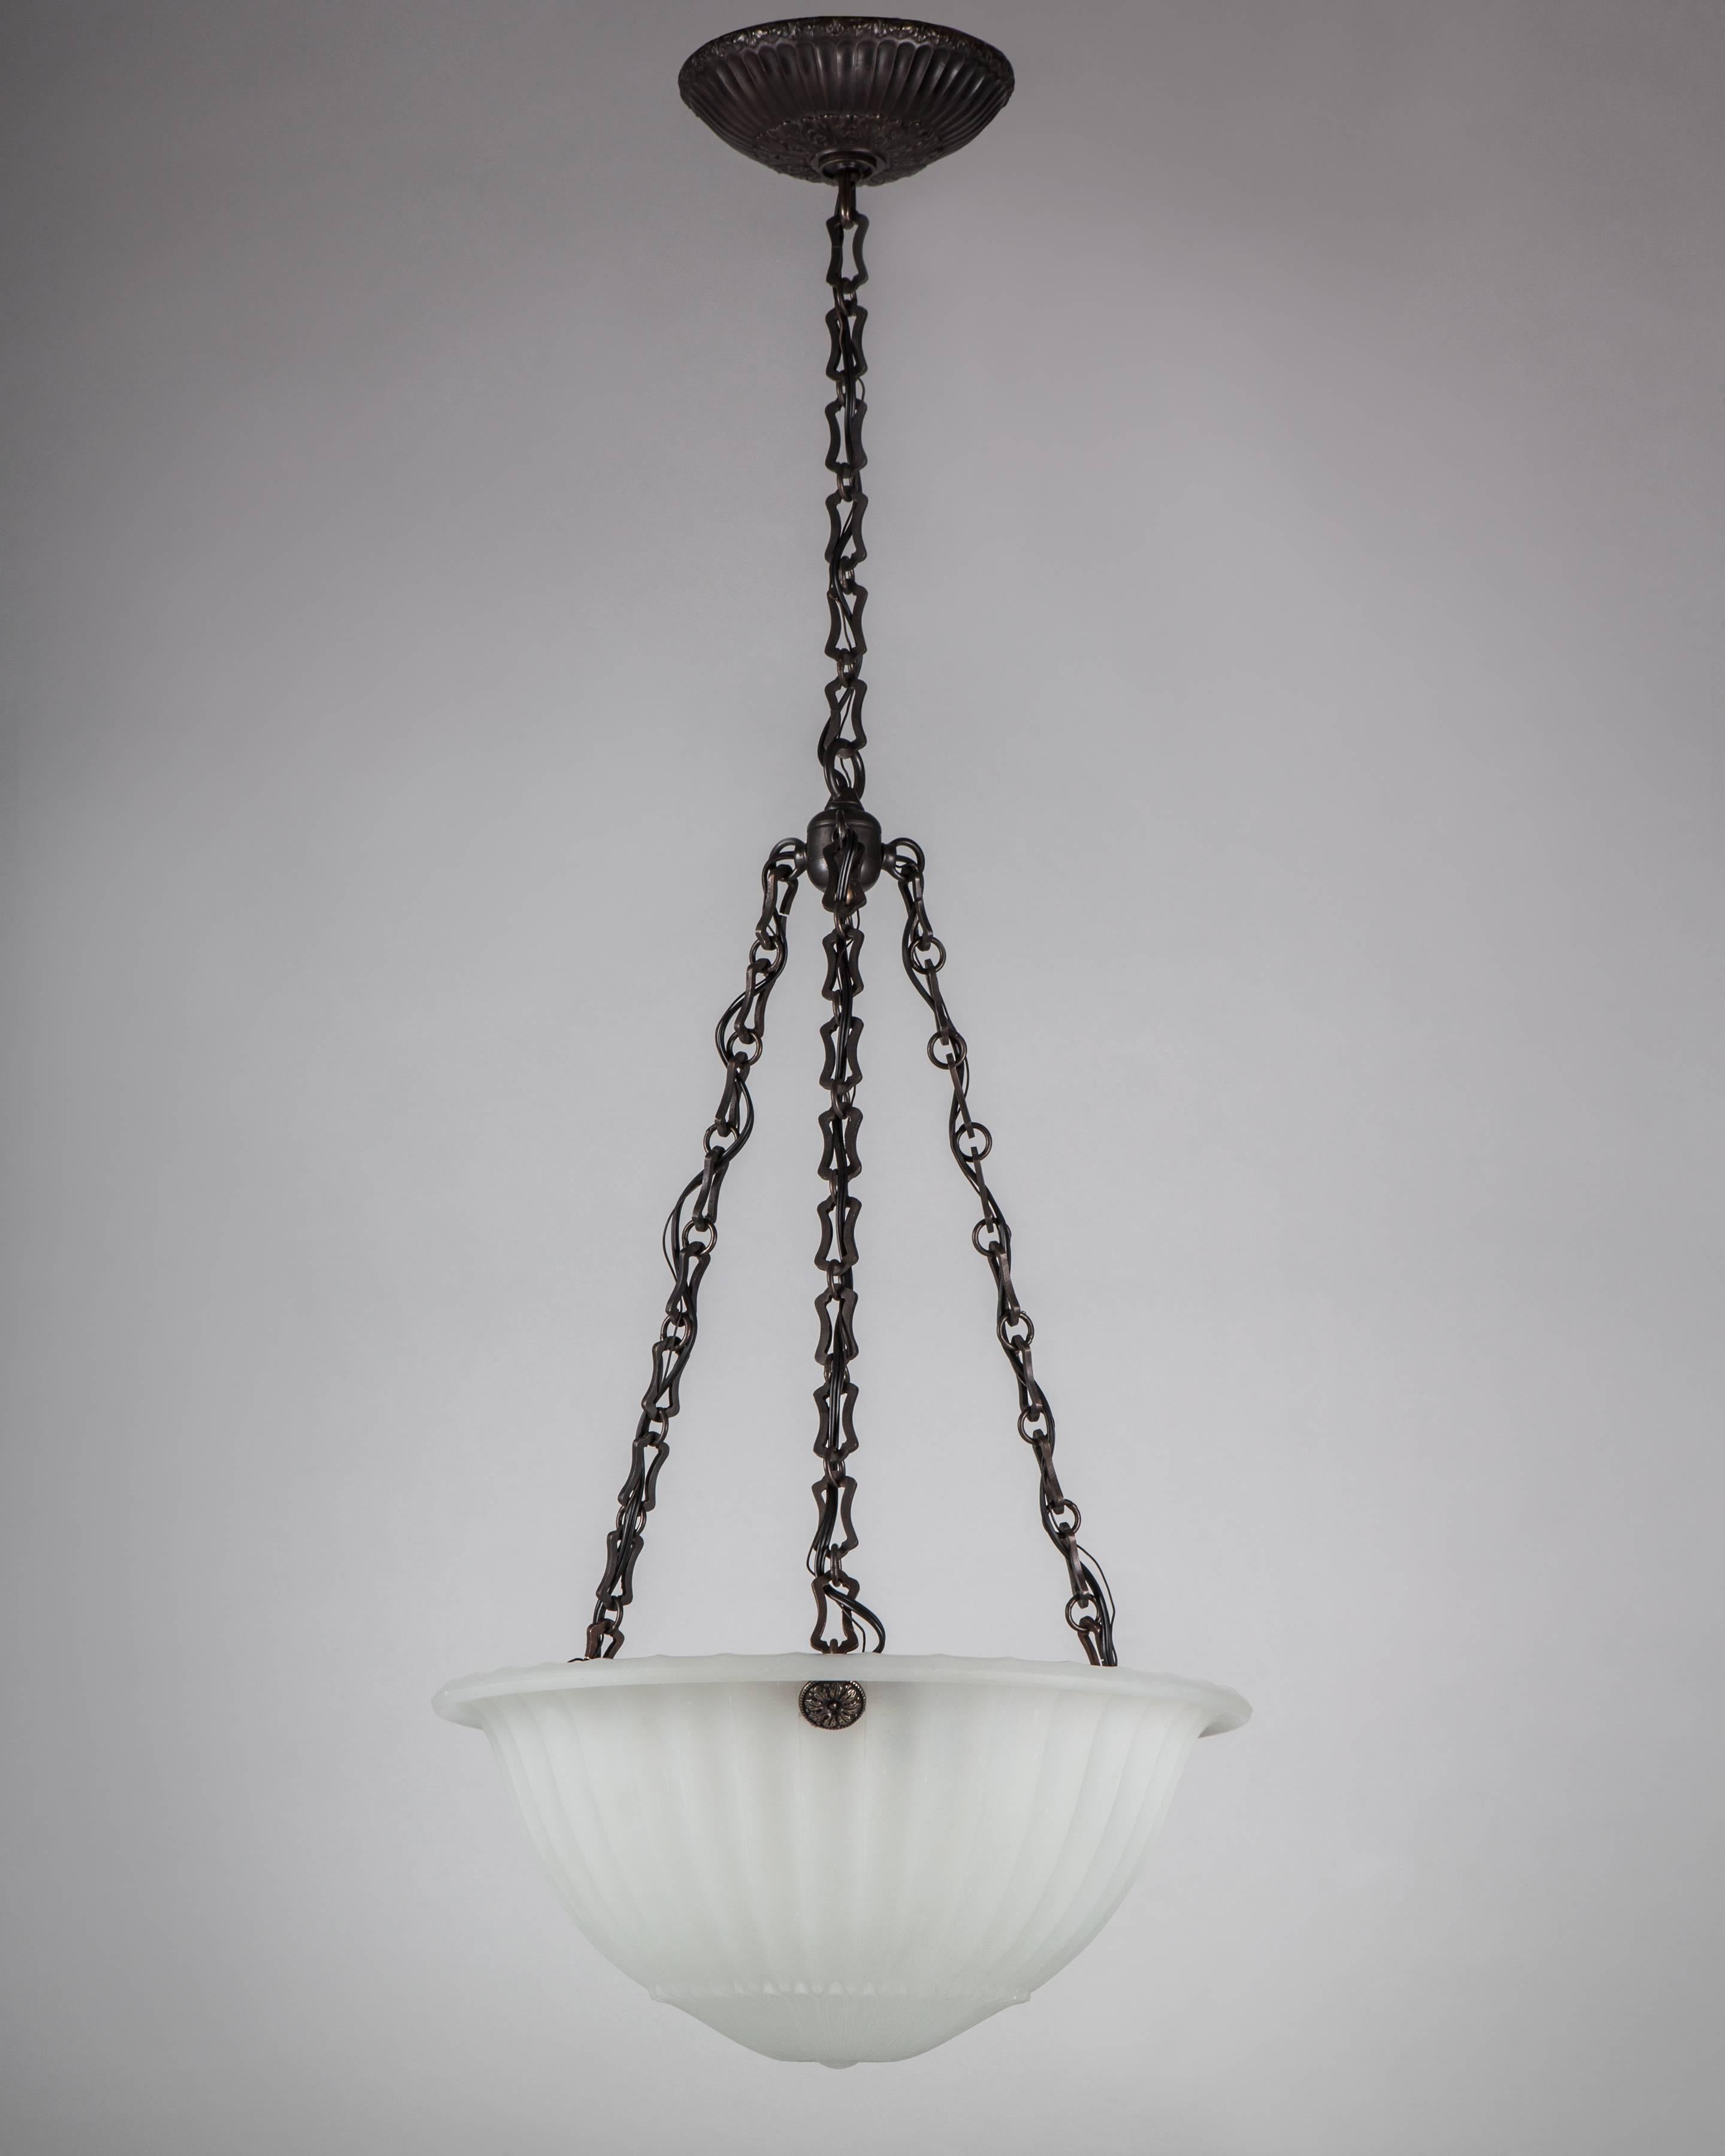 AHL4131
An inverted dome chandelier with a cast opaline glass body having a foliate rosette center and fluting above, suspended on darkened brass fittings. Due to the antique nature of this fixture, there may be some nicks or imperfections in the